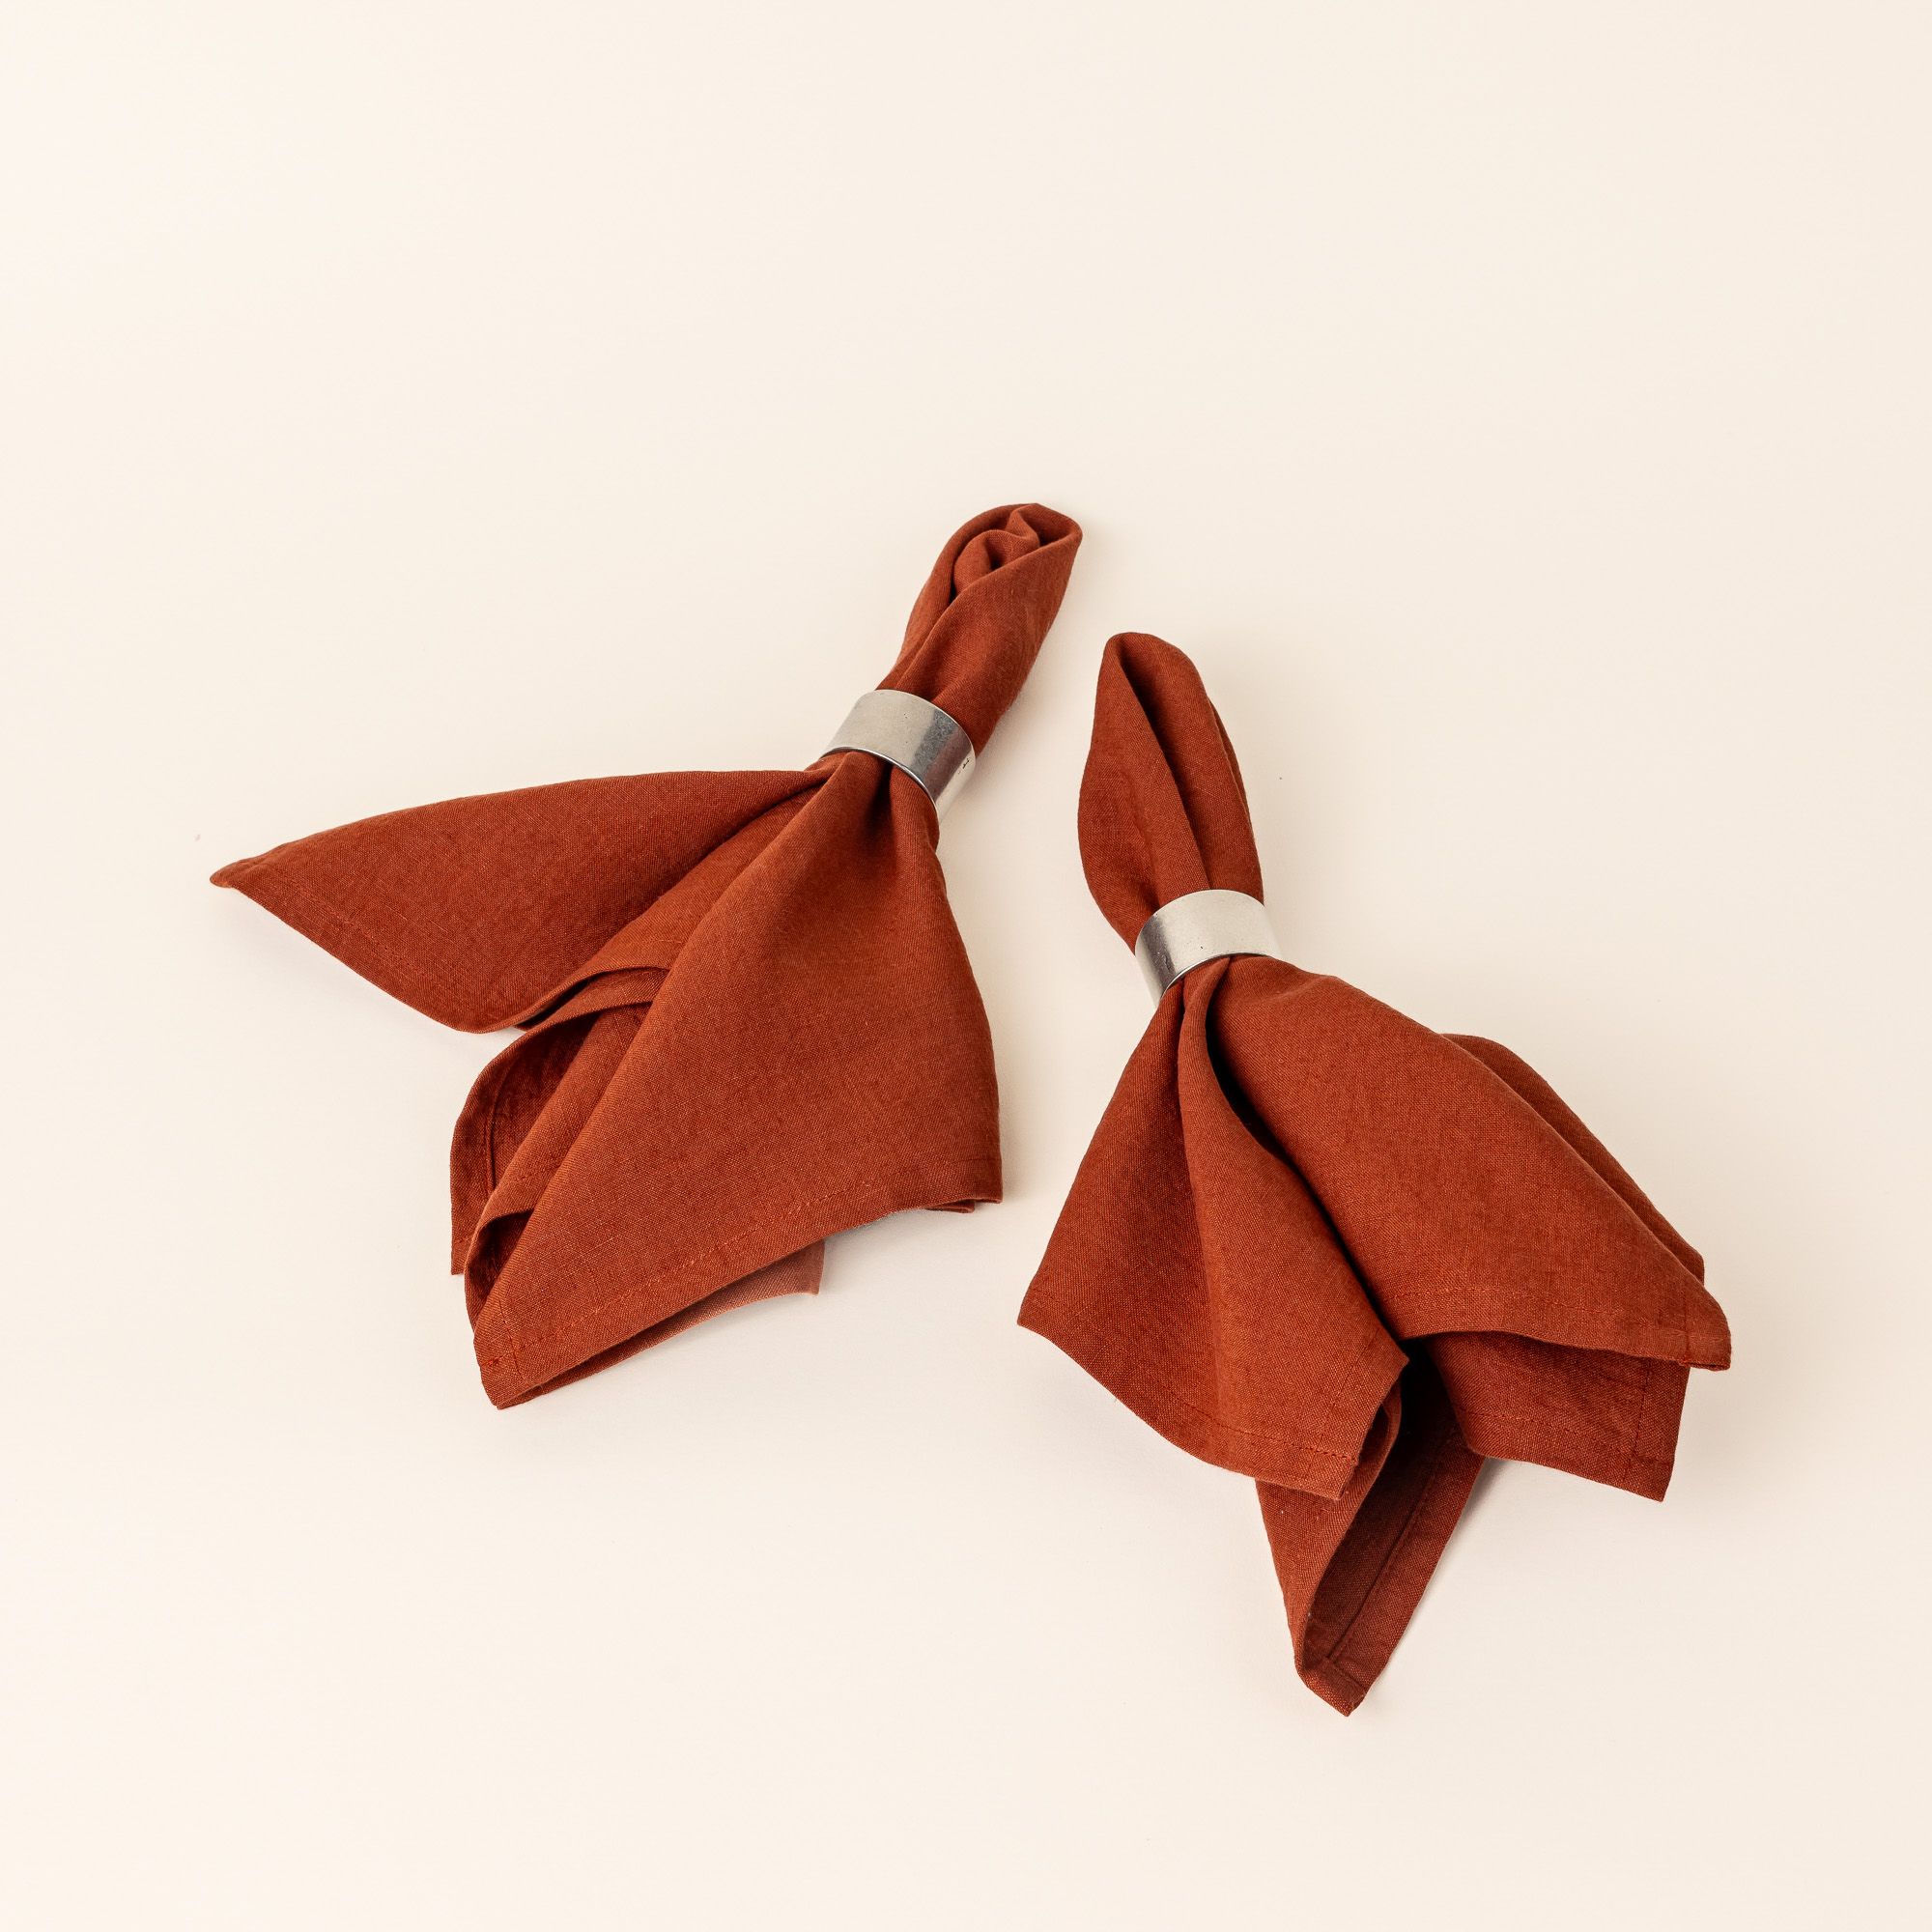 Two terracotta linen napkins are folded by the center through simple pewter napkin rings.